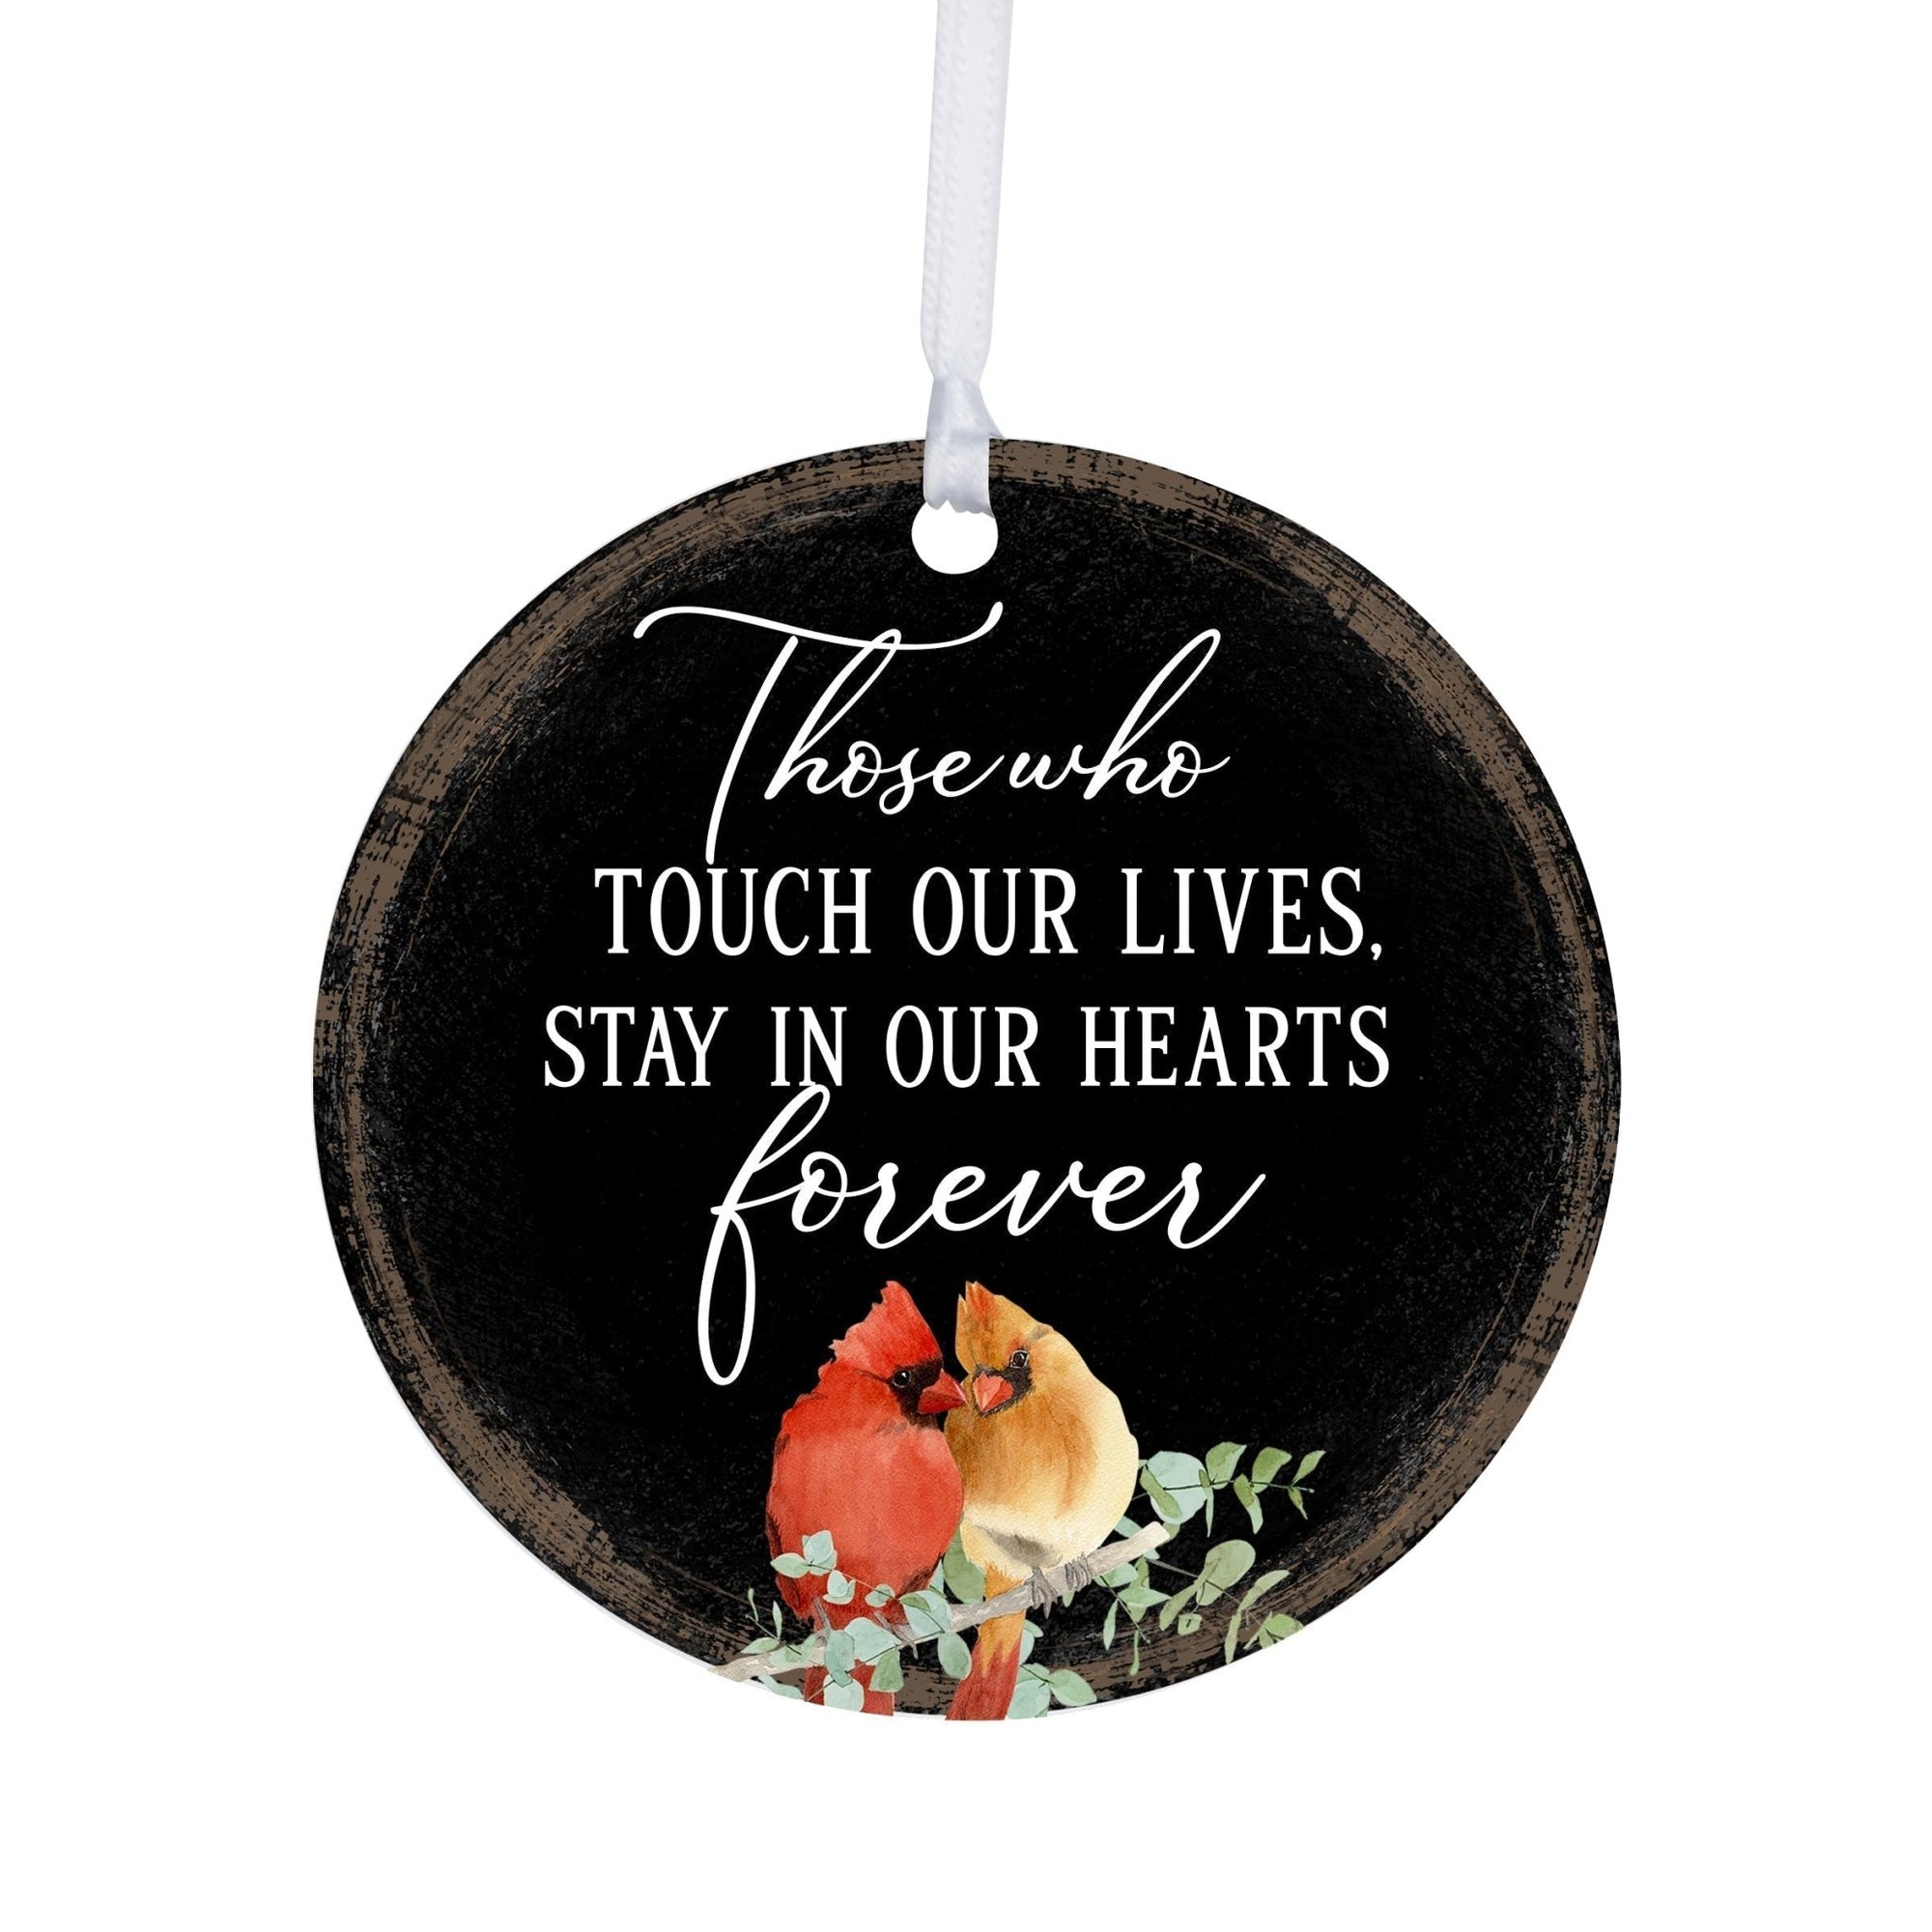 Beautiful "Bereavement Ornaments" that offer solace with their intricate patterns and heartfelt messages.